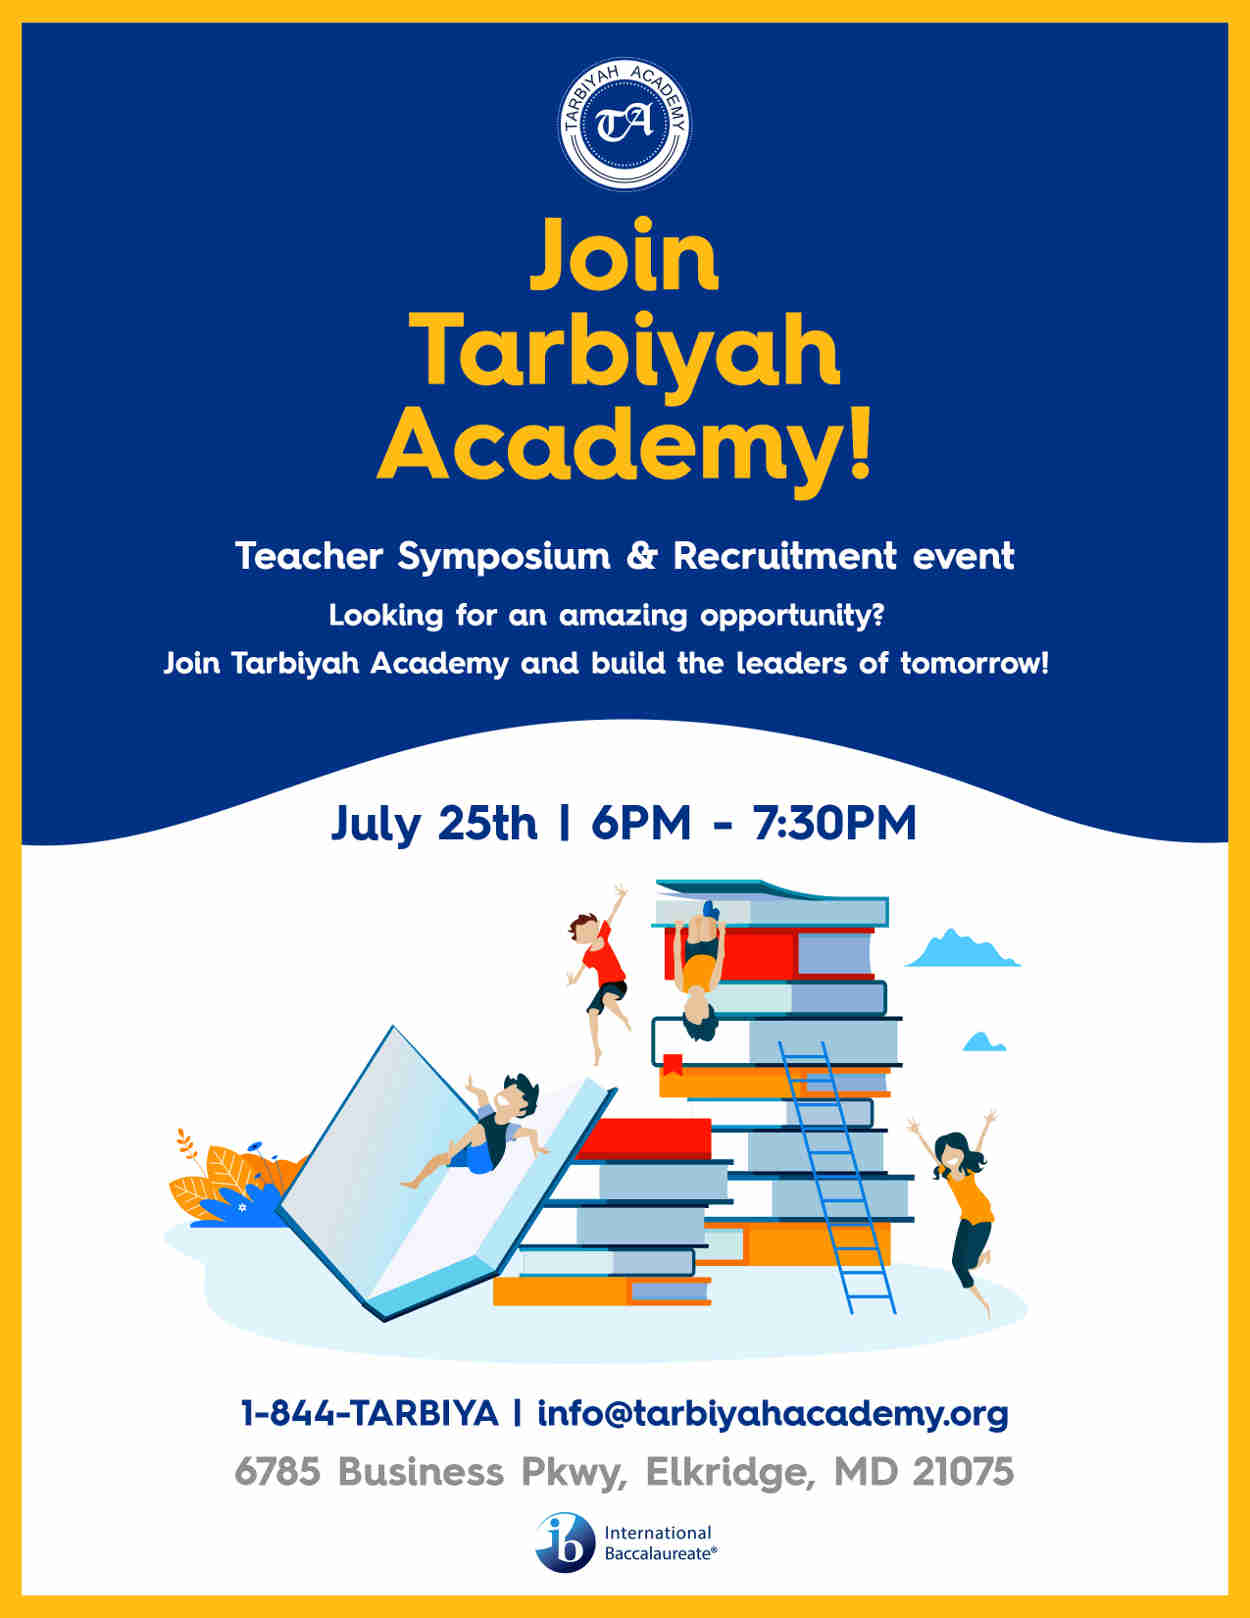 Join Tarbiyah Academy Teacher Symposium and Recruitment Event - July 25th 6pm - 7:30 pm